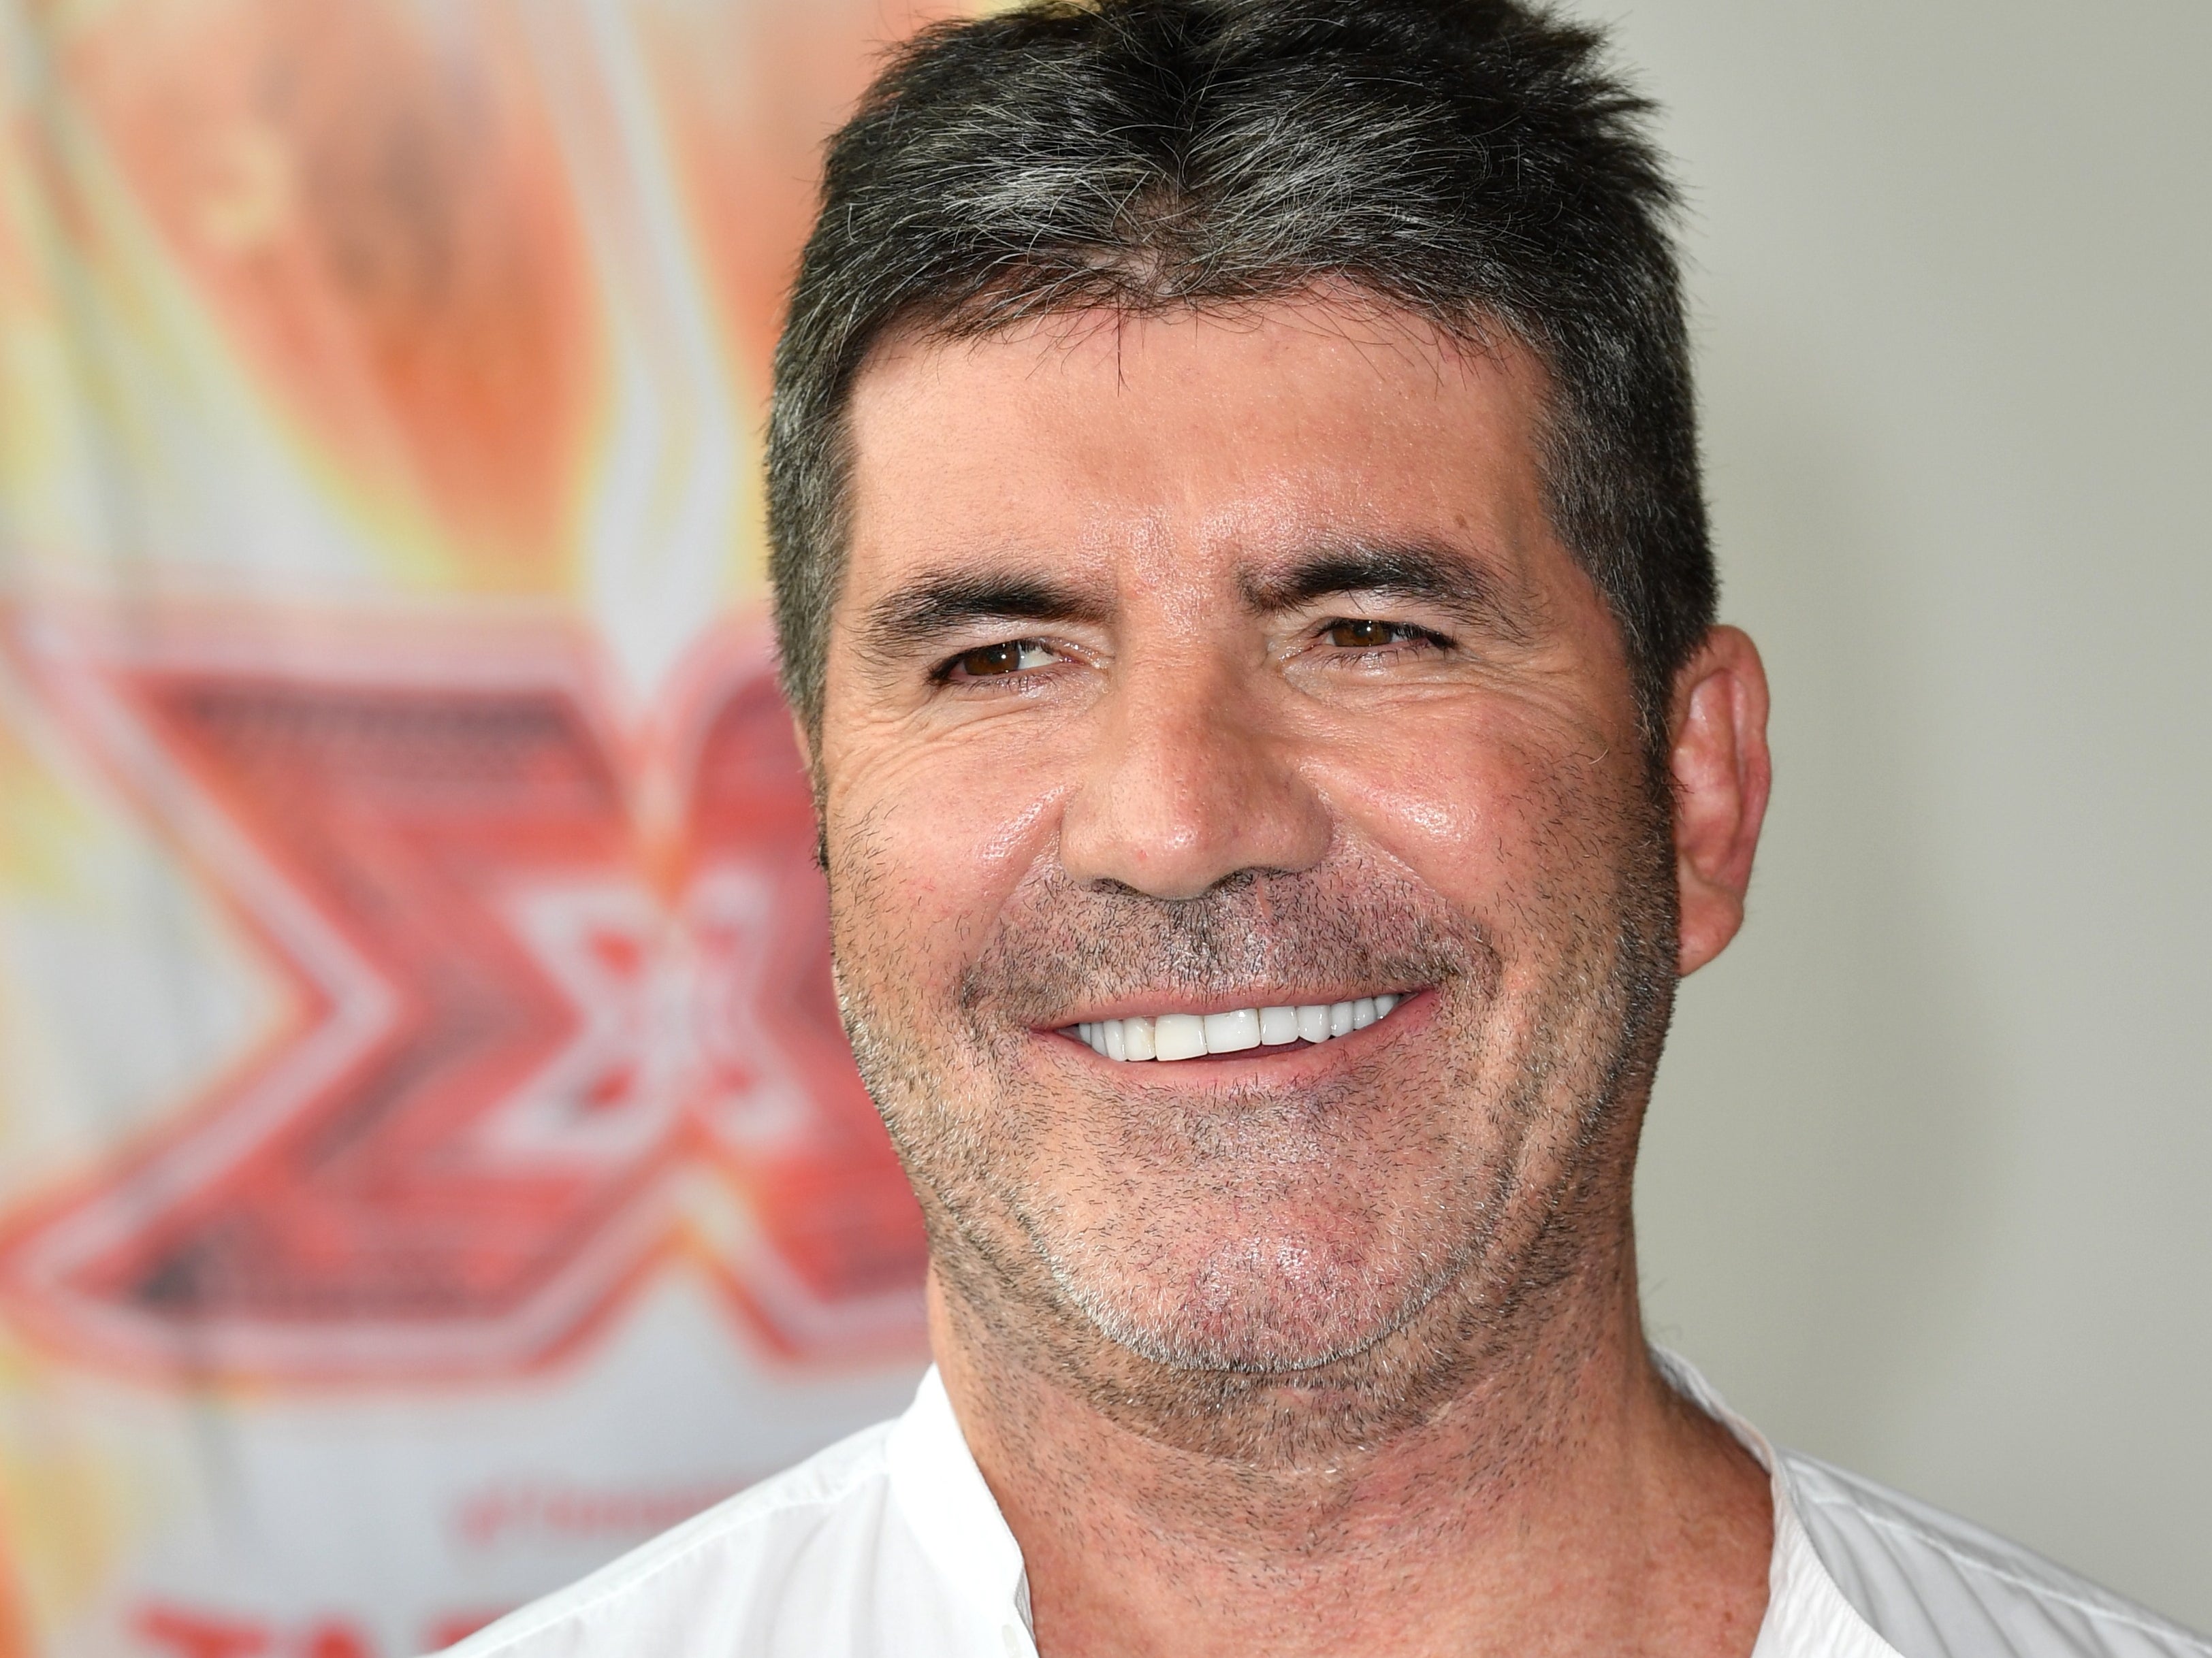 Simon Cowell created ‘X Factor’ in 2004 and ‘Got Talent’ in 2006